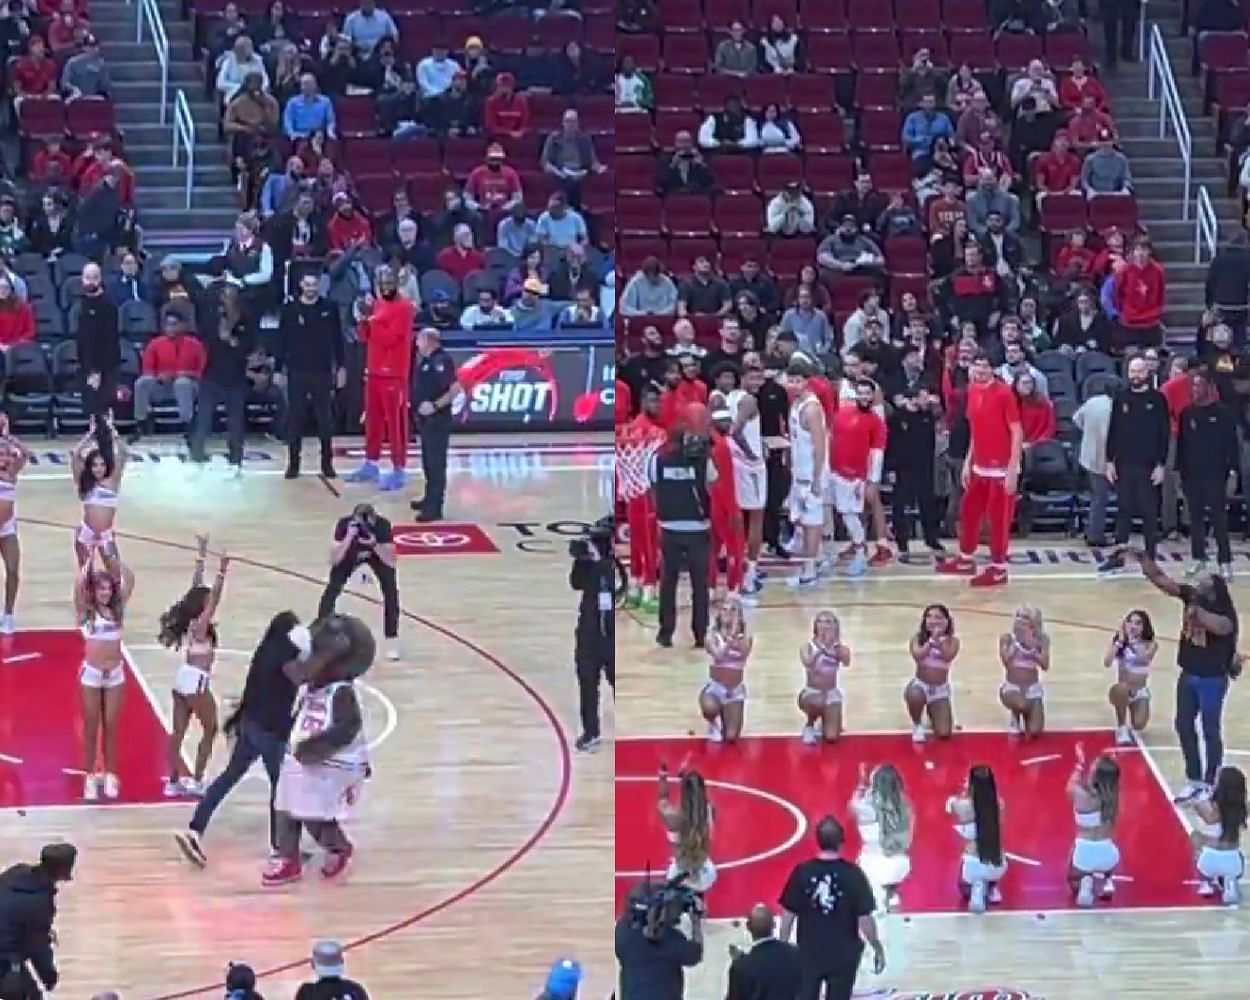 Booker T knocks out Rockets mascot then misses free throw shot